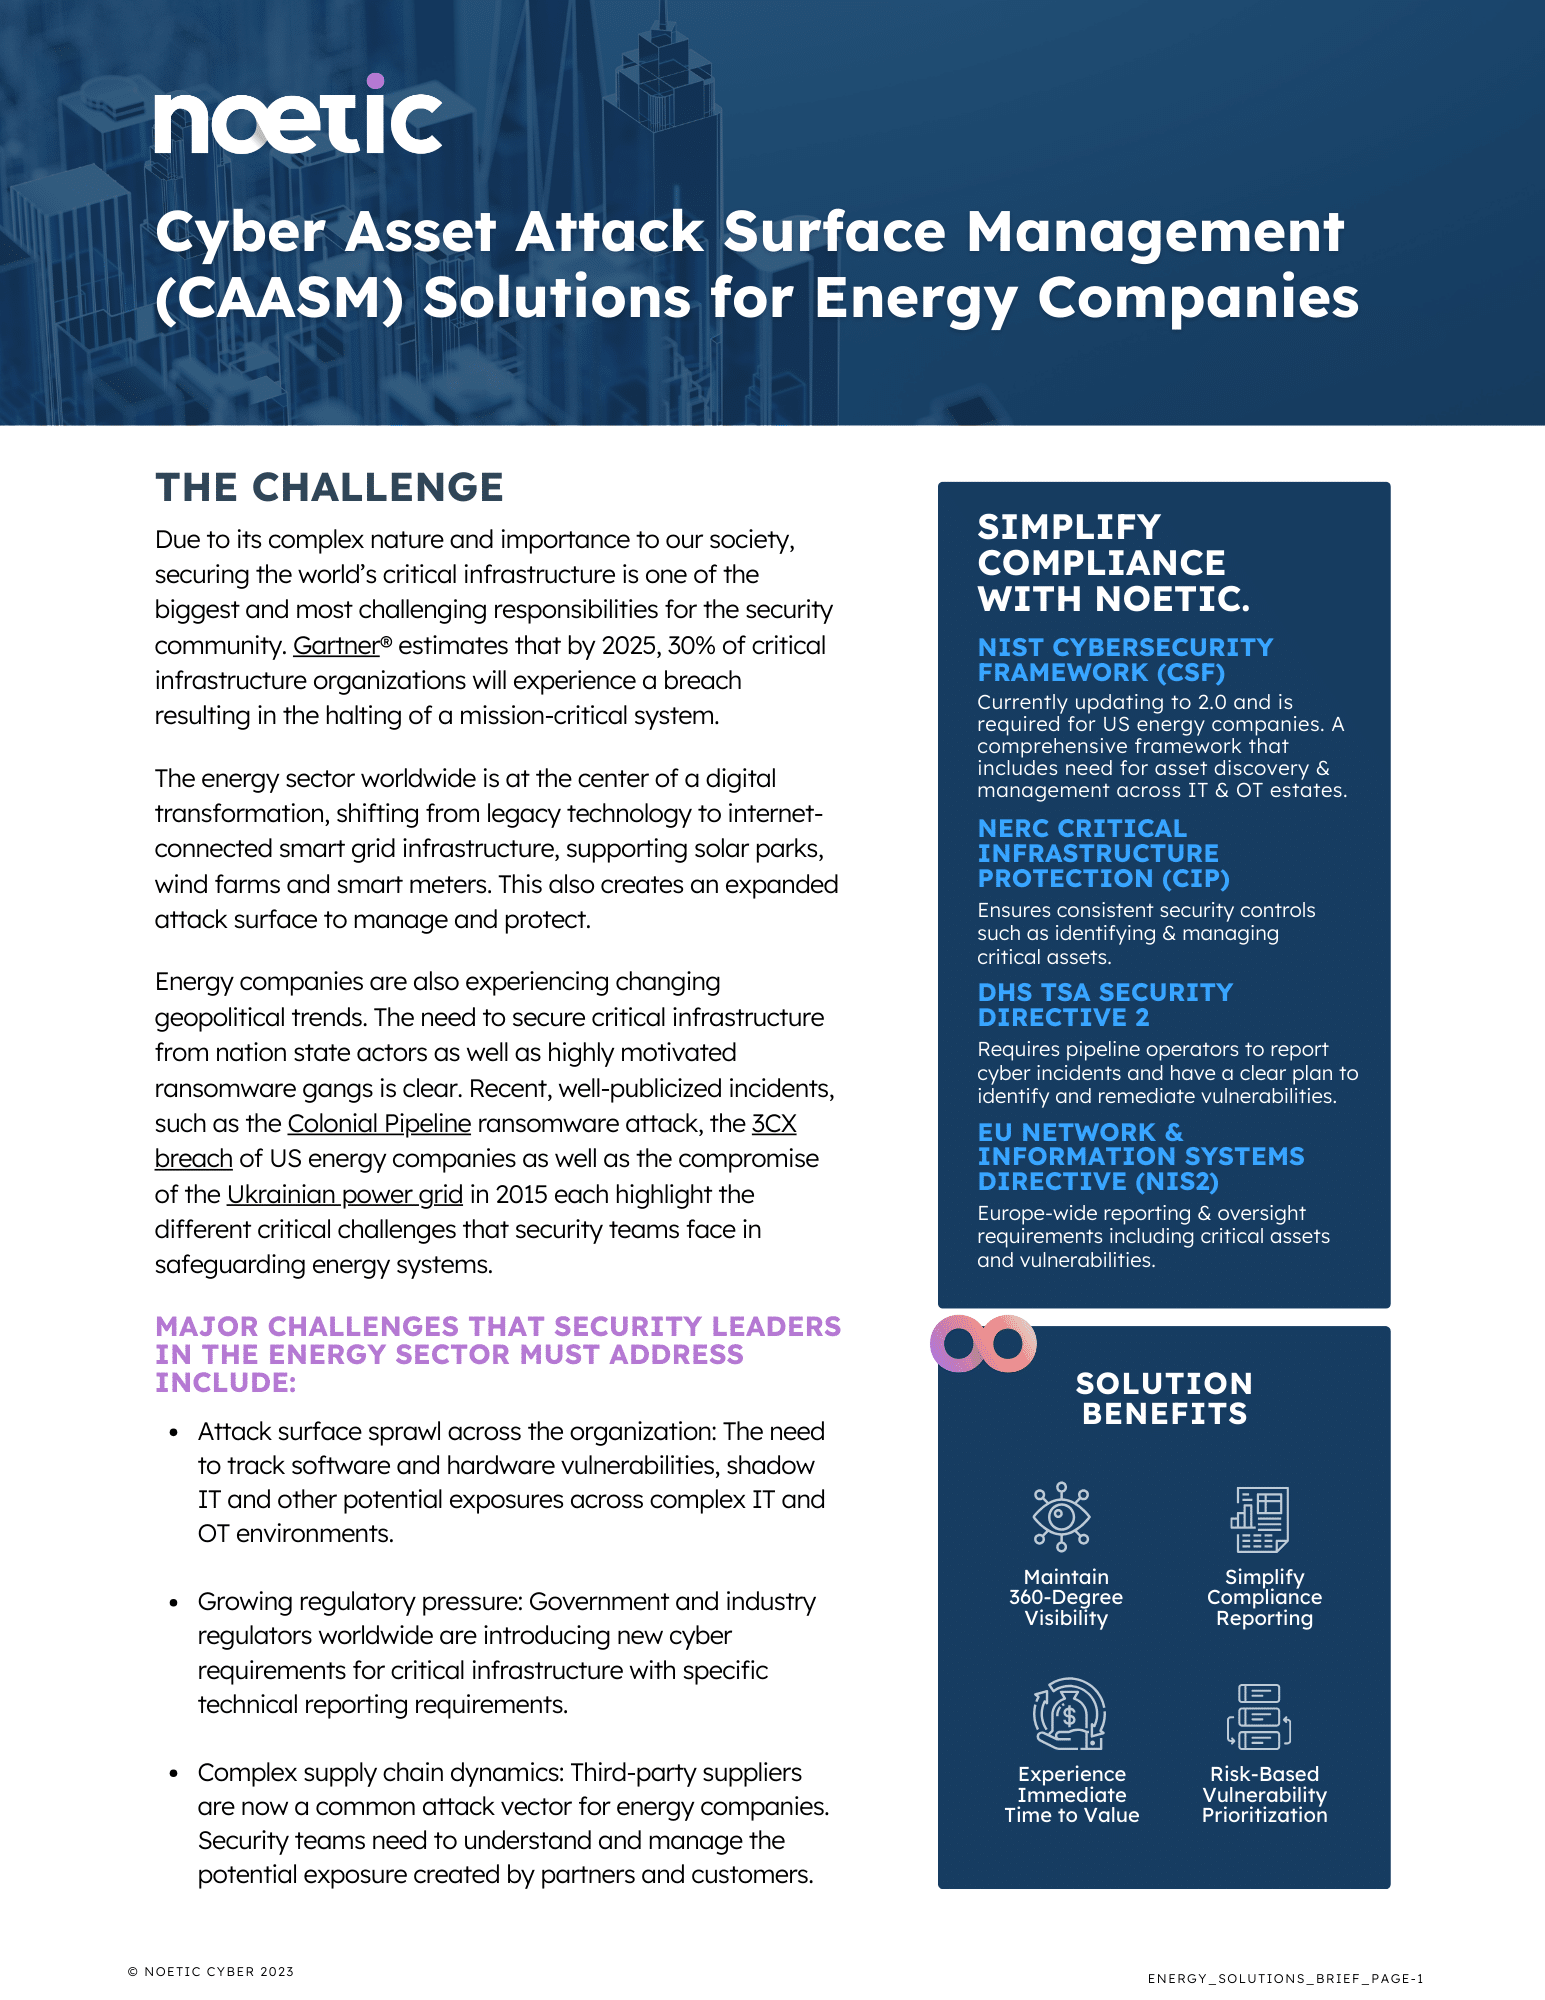 Cover of Noetic solutions brief for energy companies